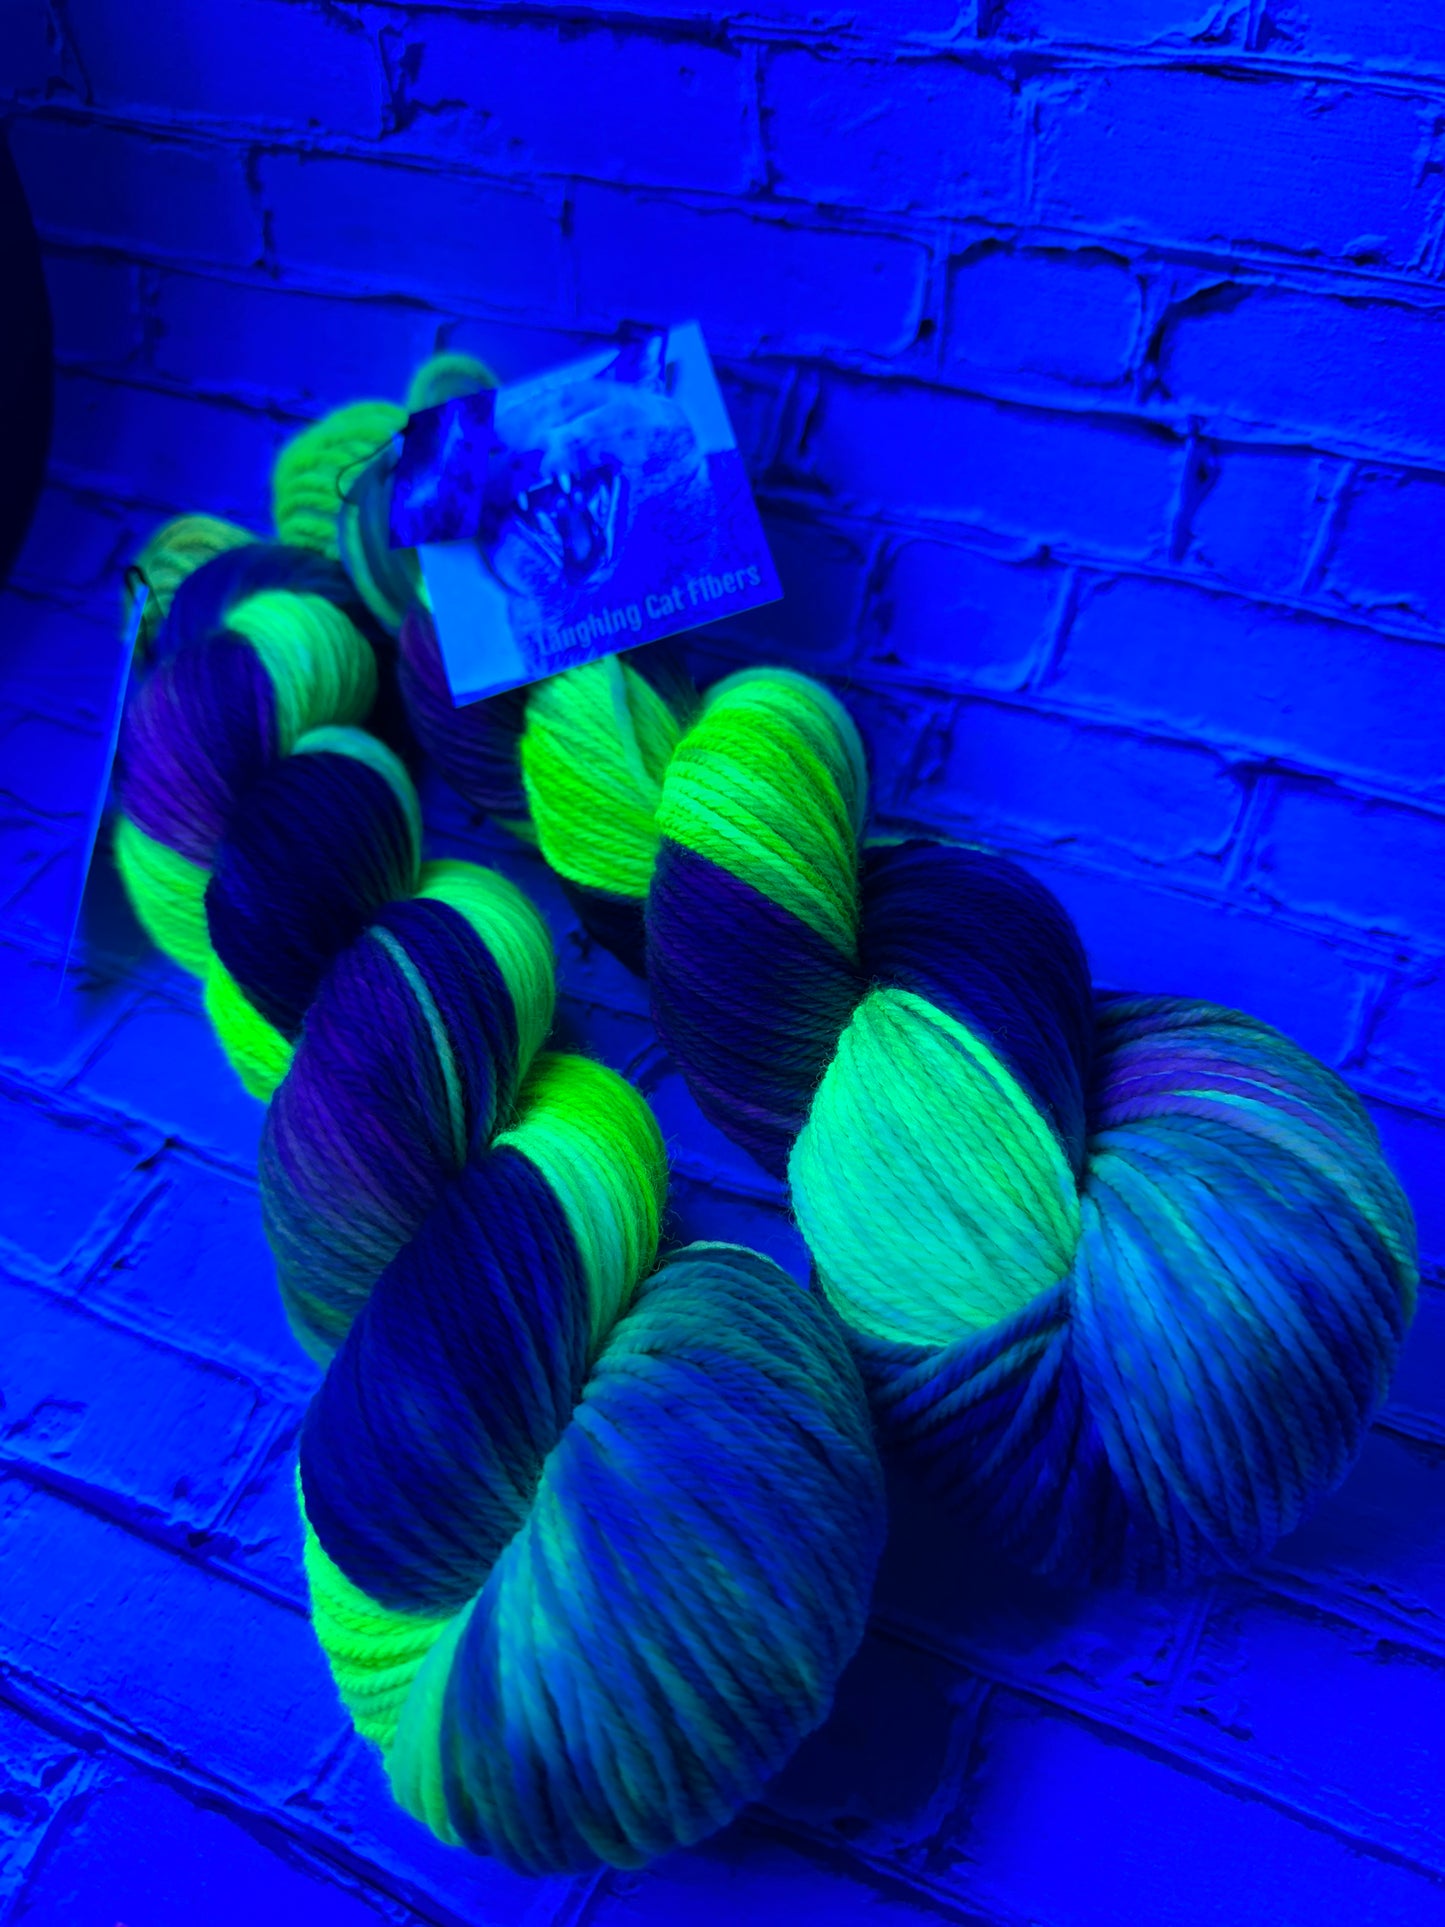 "Ethereal" on Various Yarn Bases